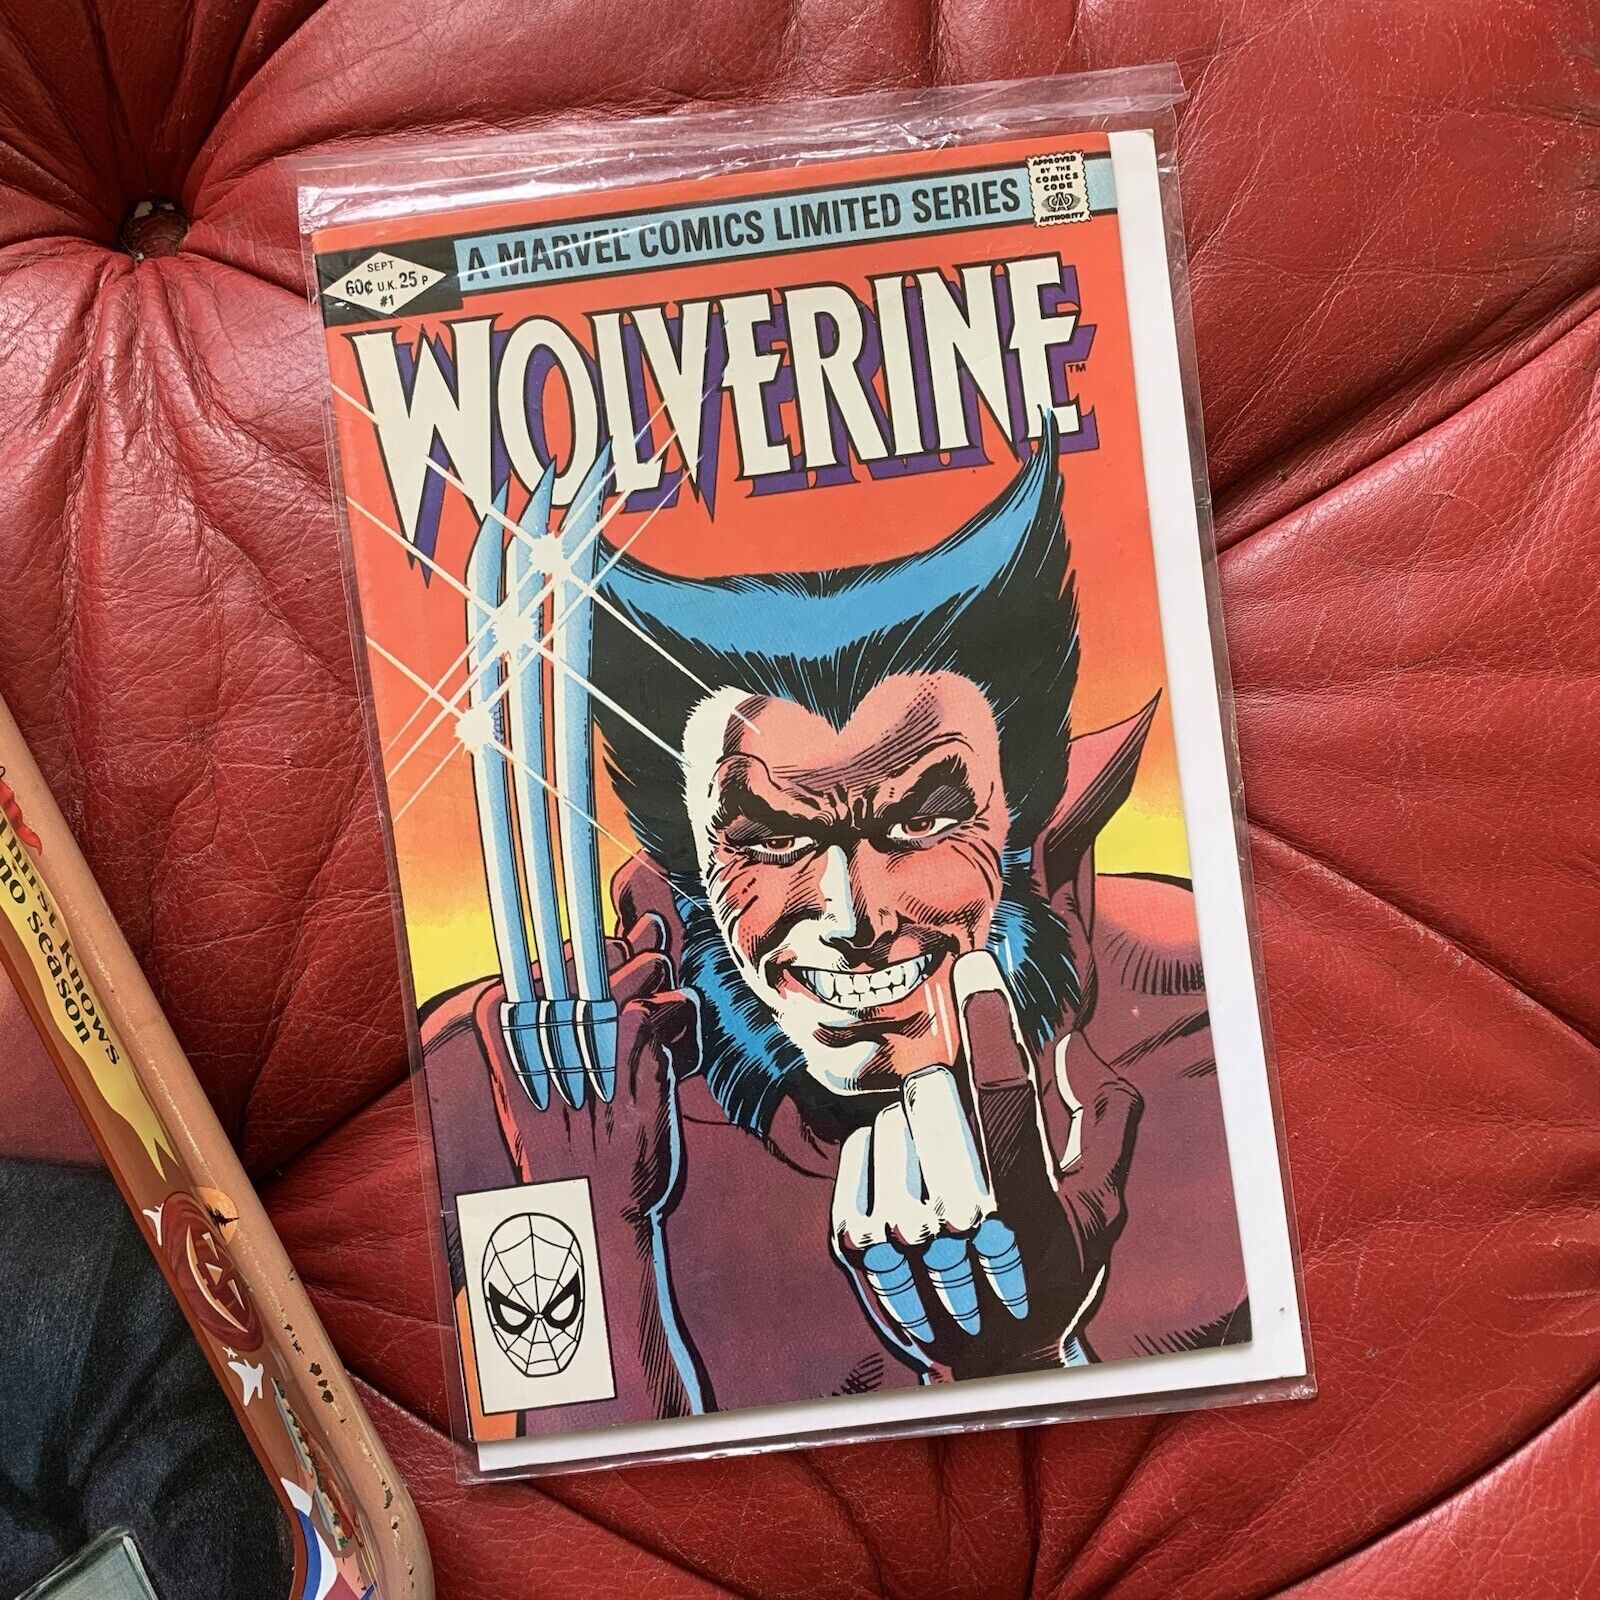 Wolverine # 1 A Marvel Comics Limited Series (1982) by Frank Miller - Sealed